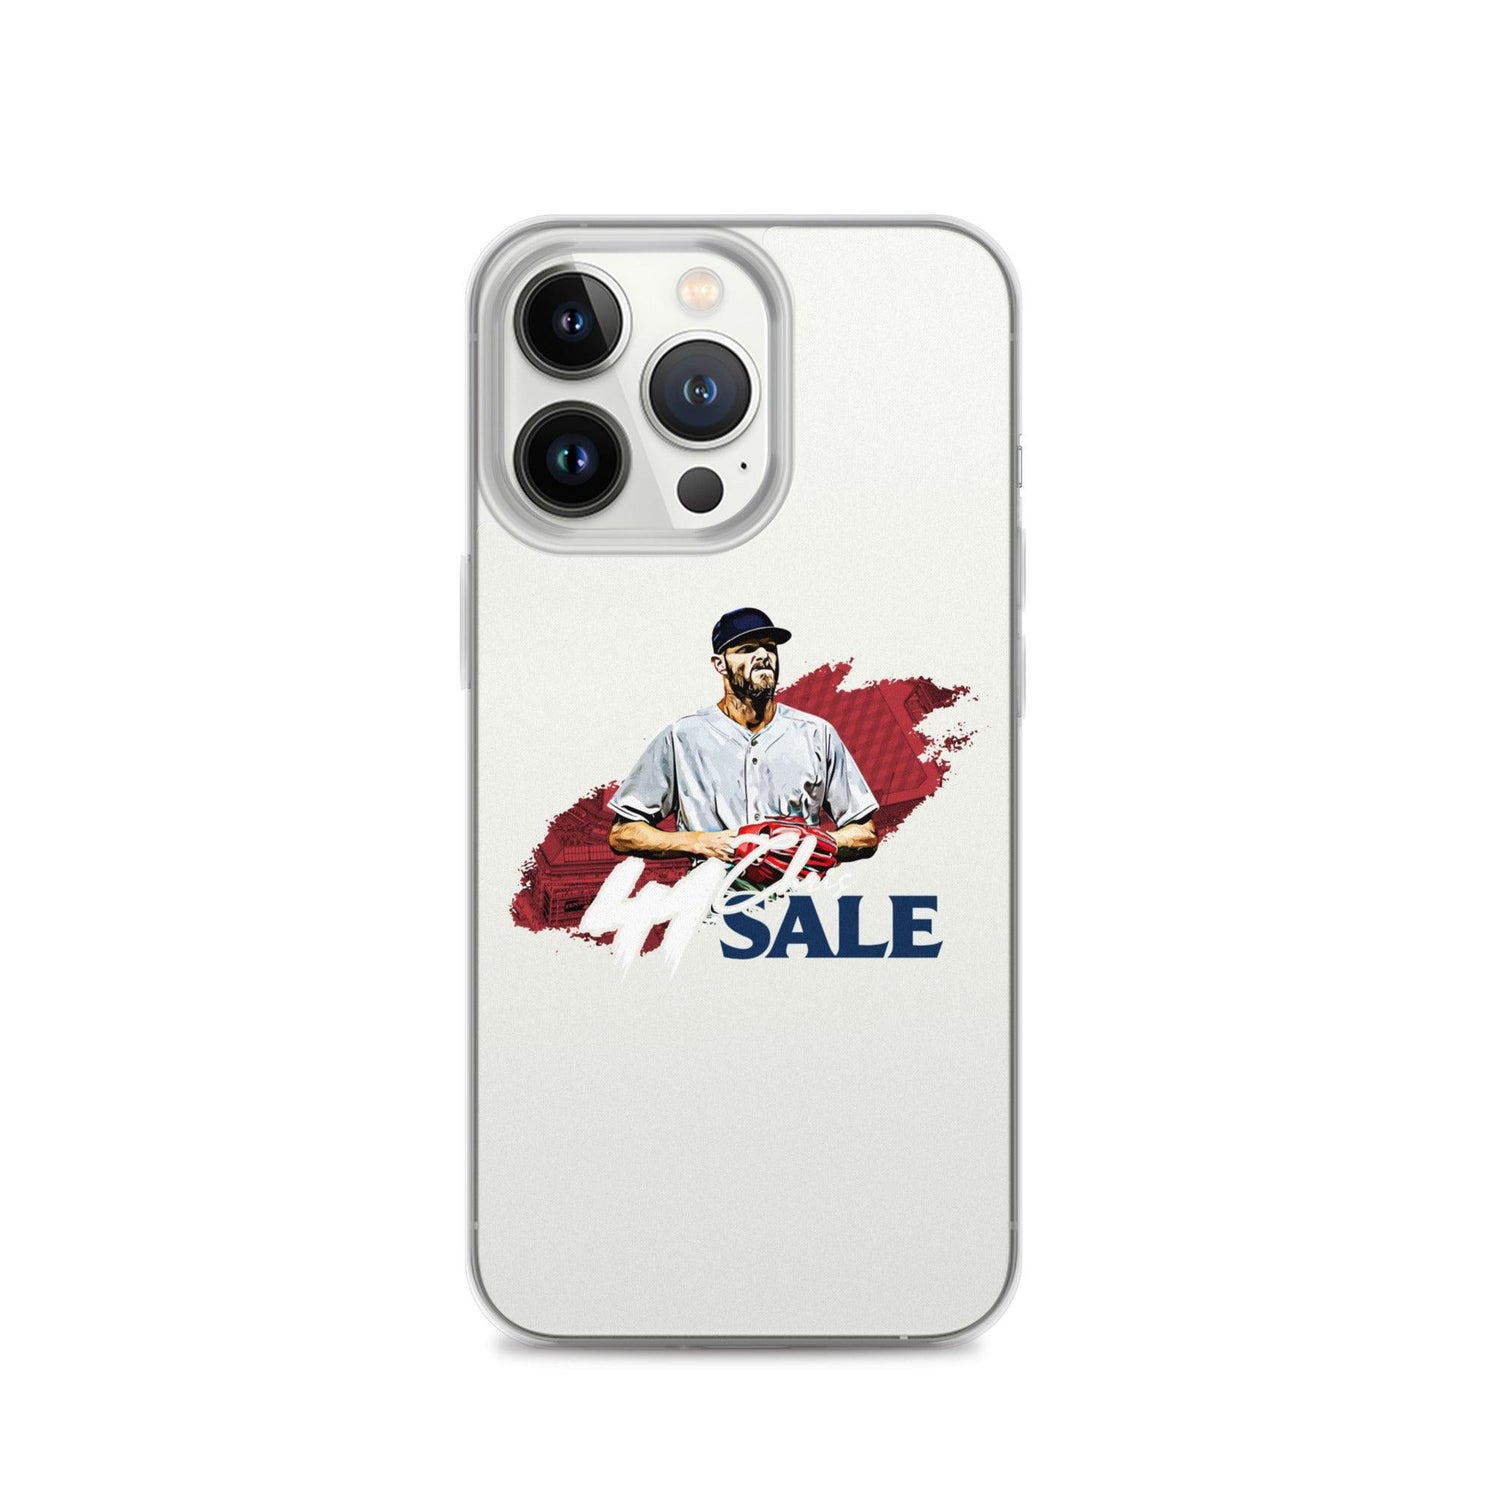 Chris Sale "Gameday" iPhone Case - Fan Arch